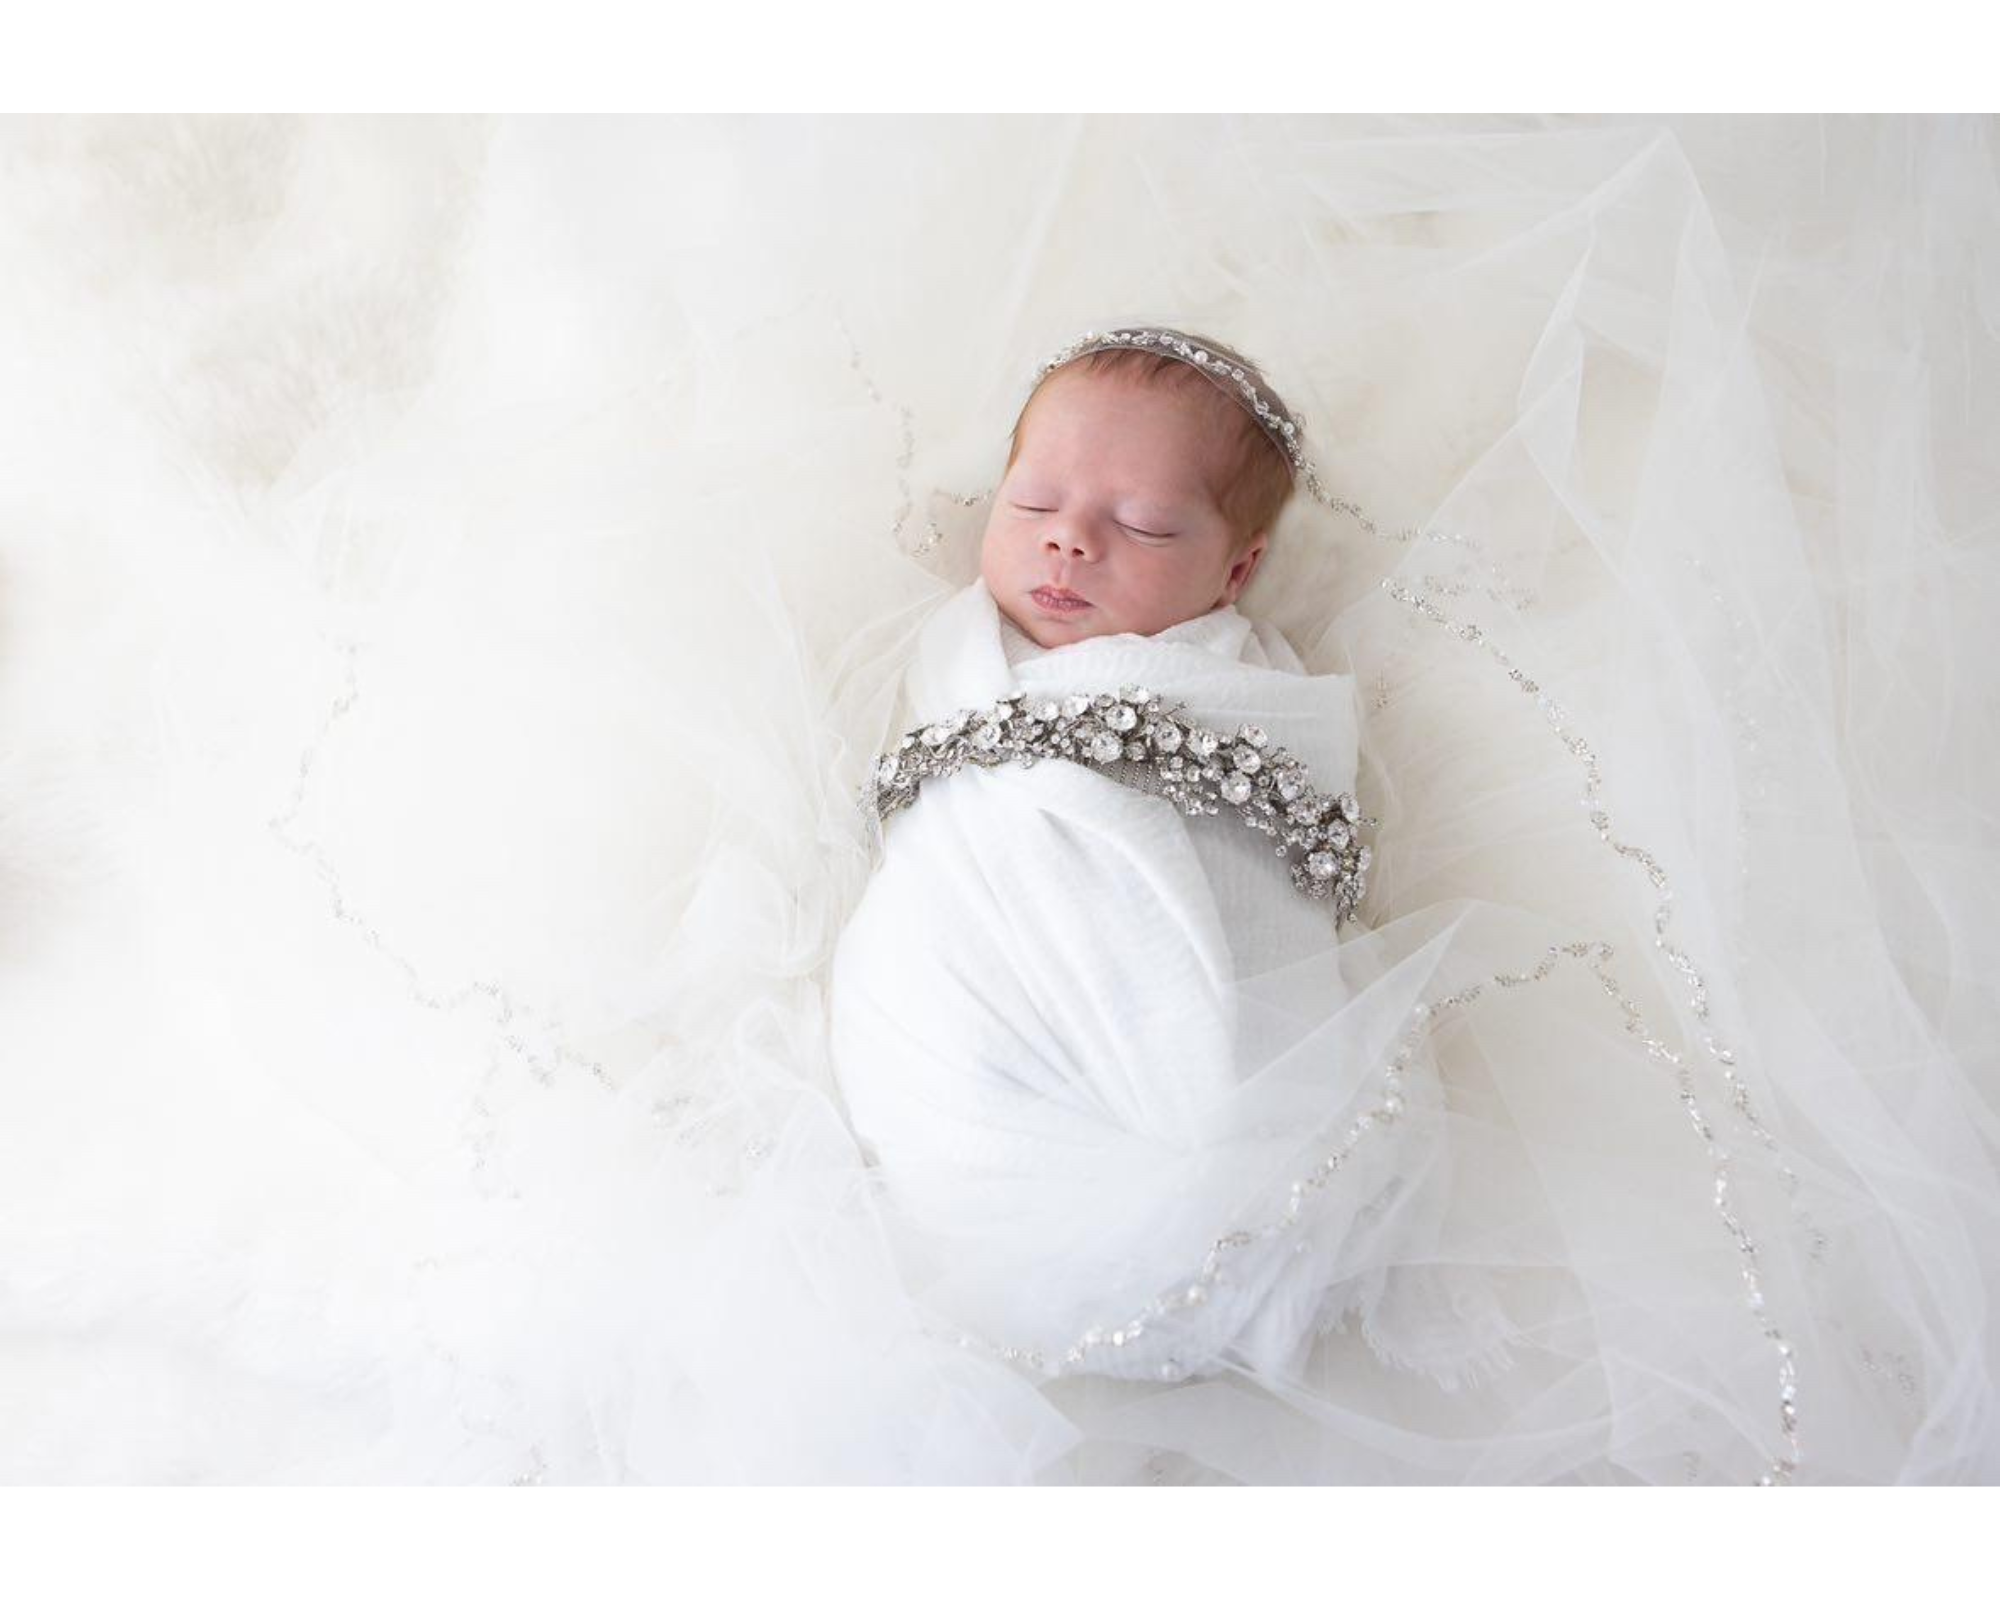 A baby wrapped in a white blanket wearing her mom's Swarovski crystal bridal headpiece.